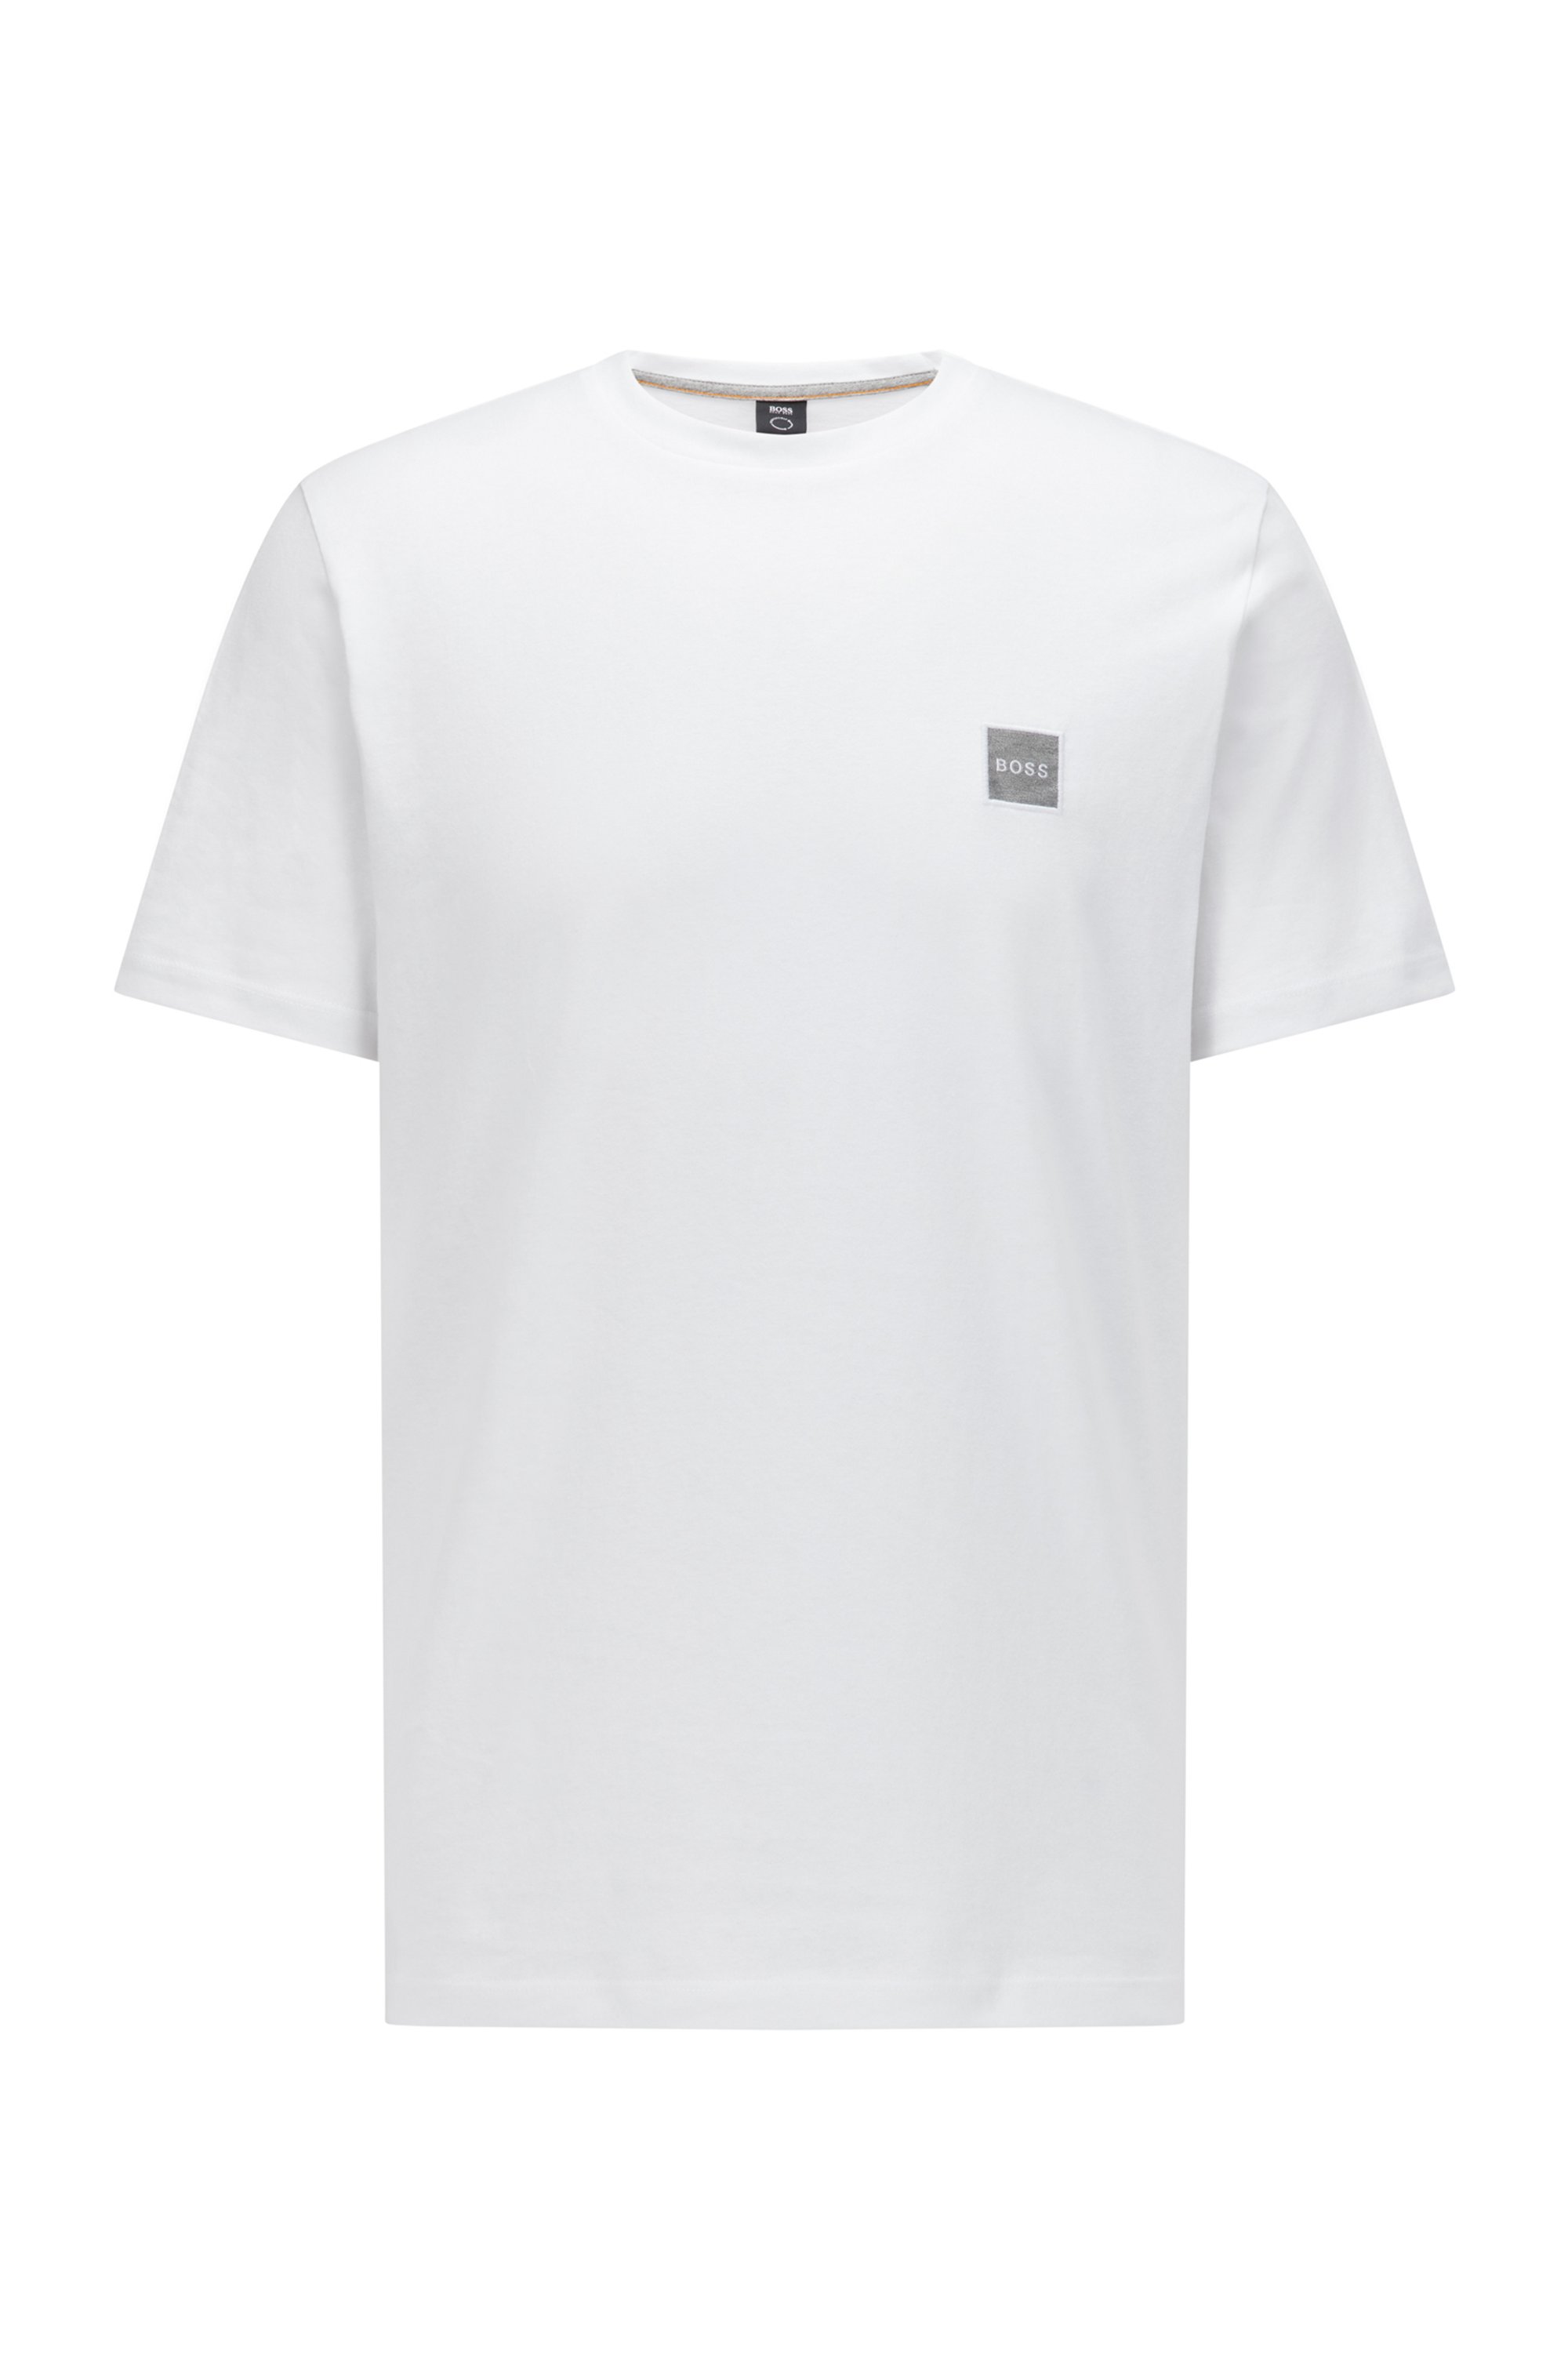 Crew-neck T-shirt in organic cotton with logo patch, White